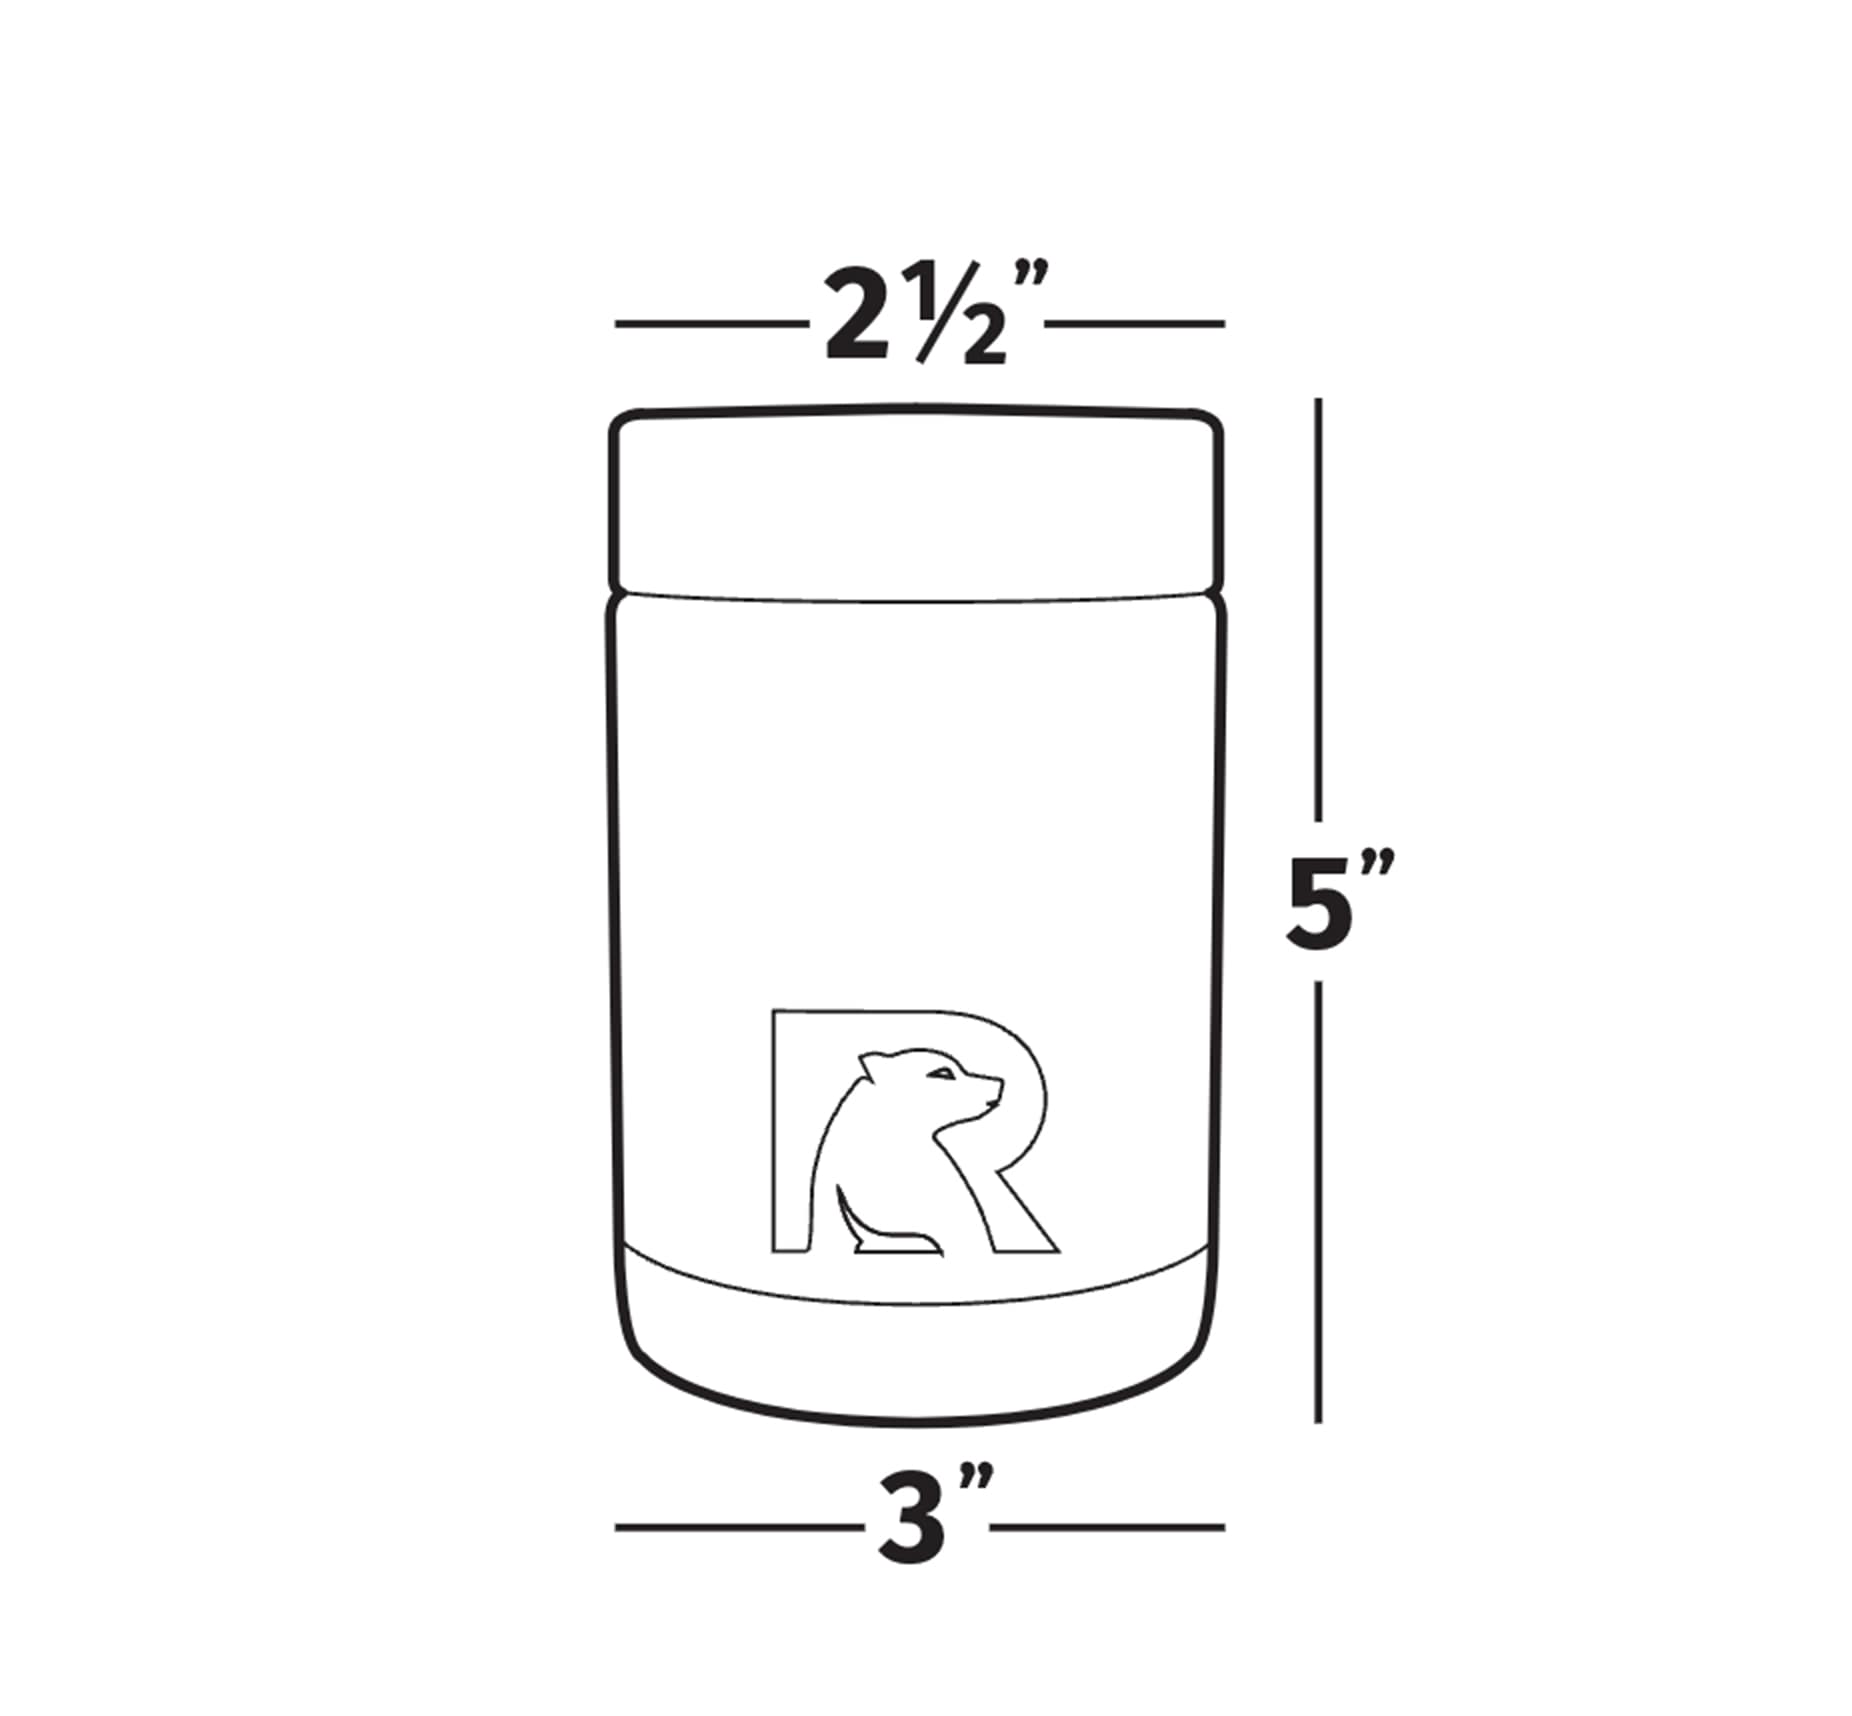 20 oz RTIC Tumbler - Russell's